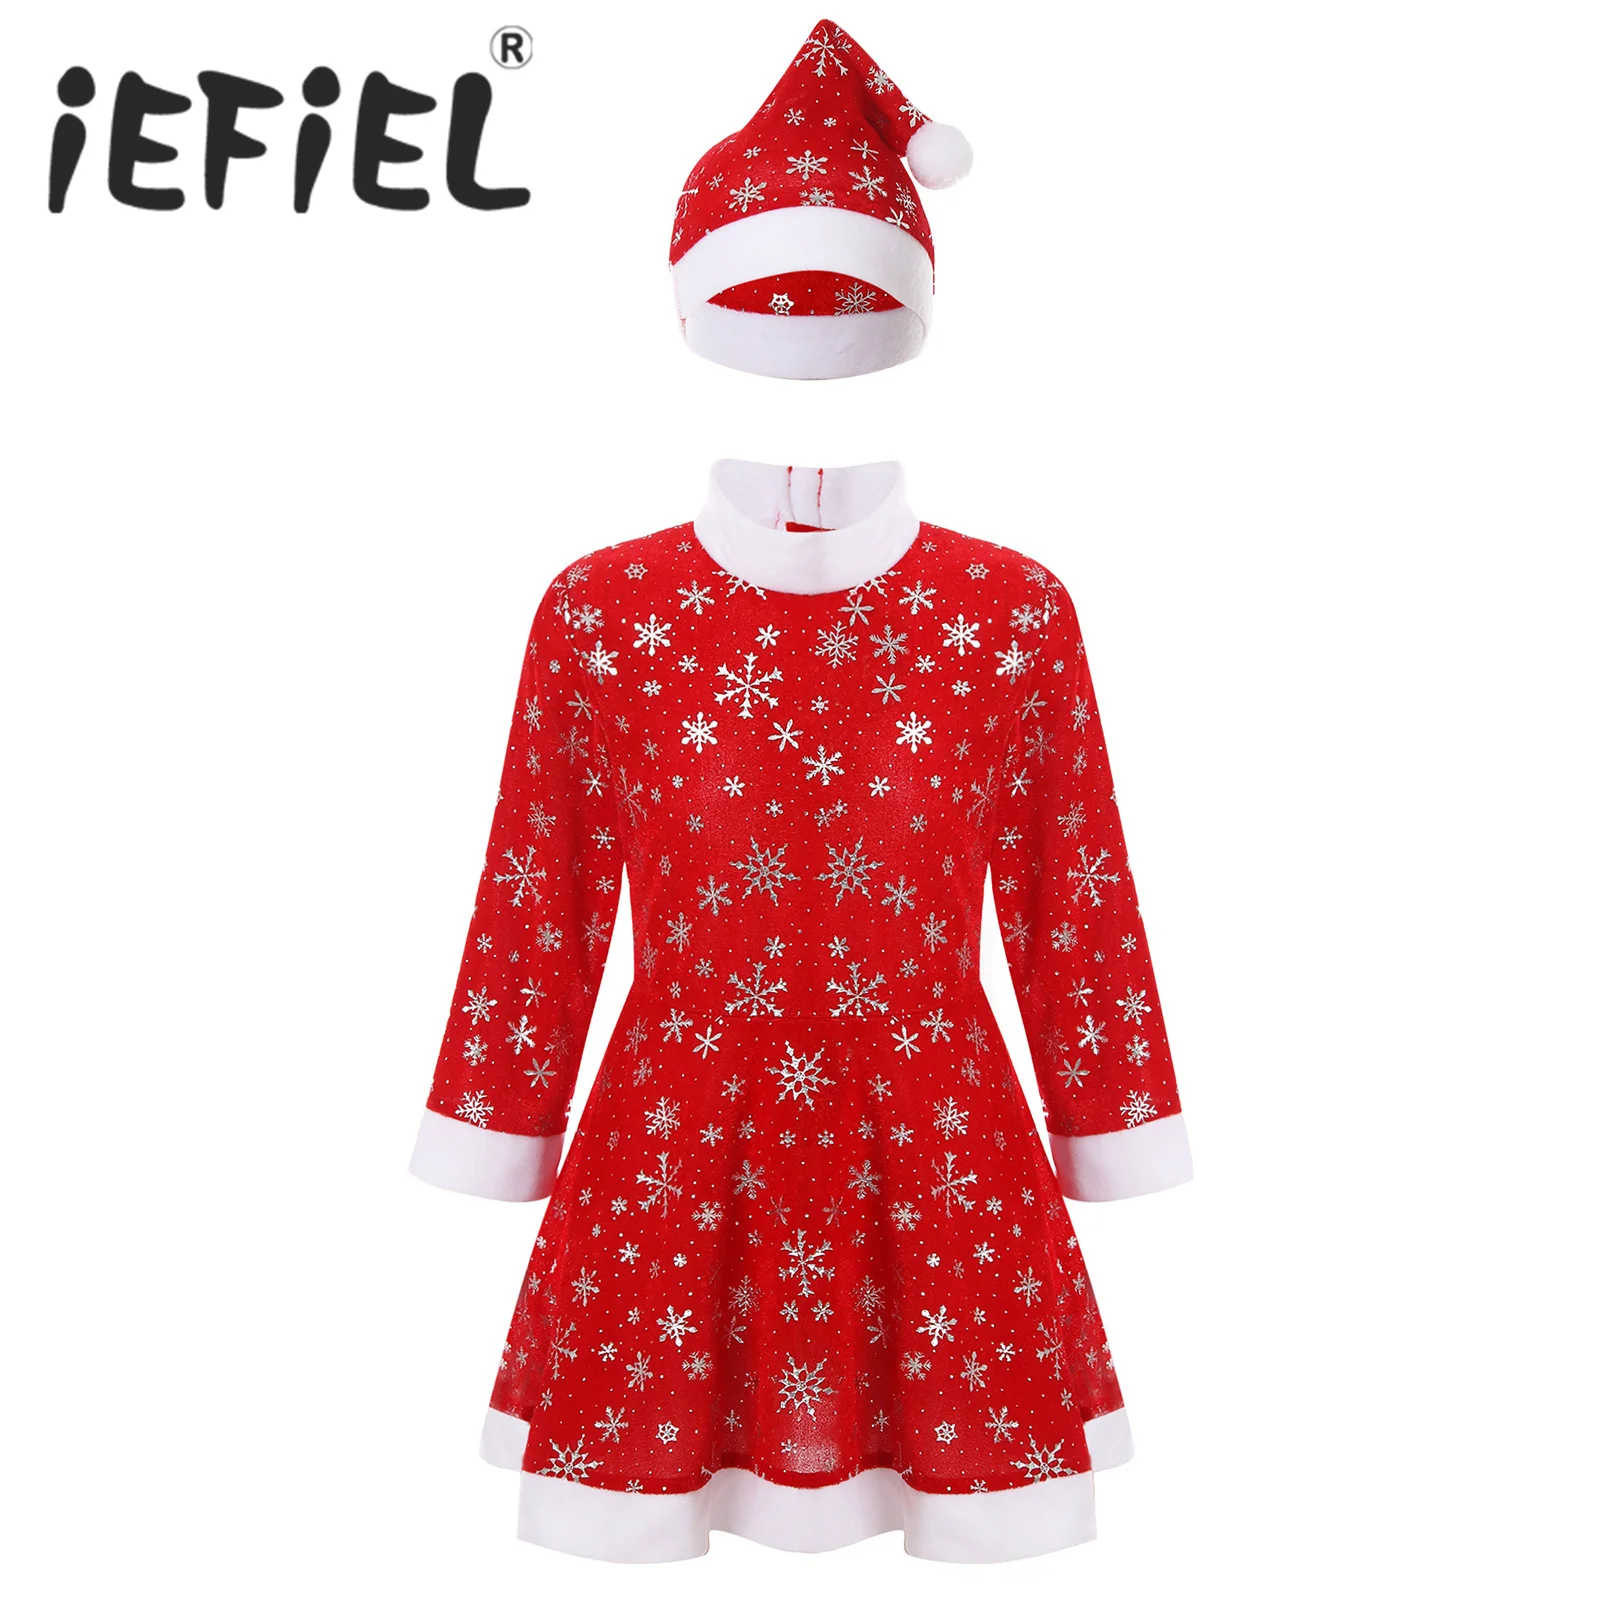 

Kids Girls Christmas Costume Xmas New Year Festival Cosplay Dress Snowflake Long Sleeve Turtleneck Santa Clause Dress with Hat